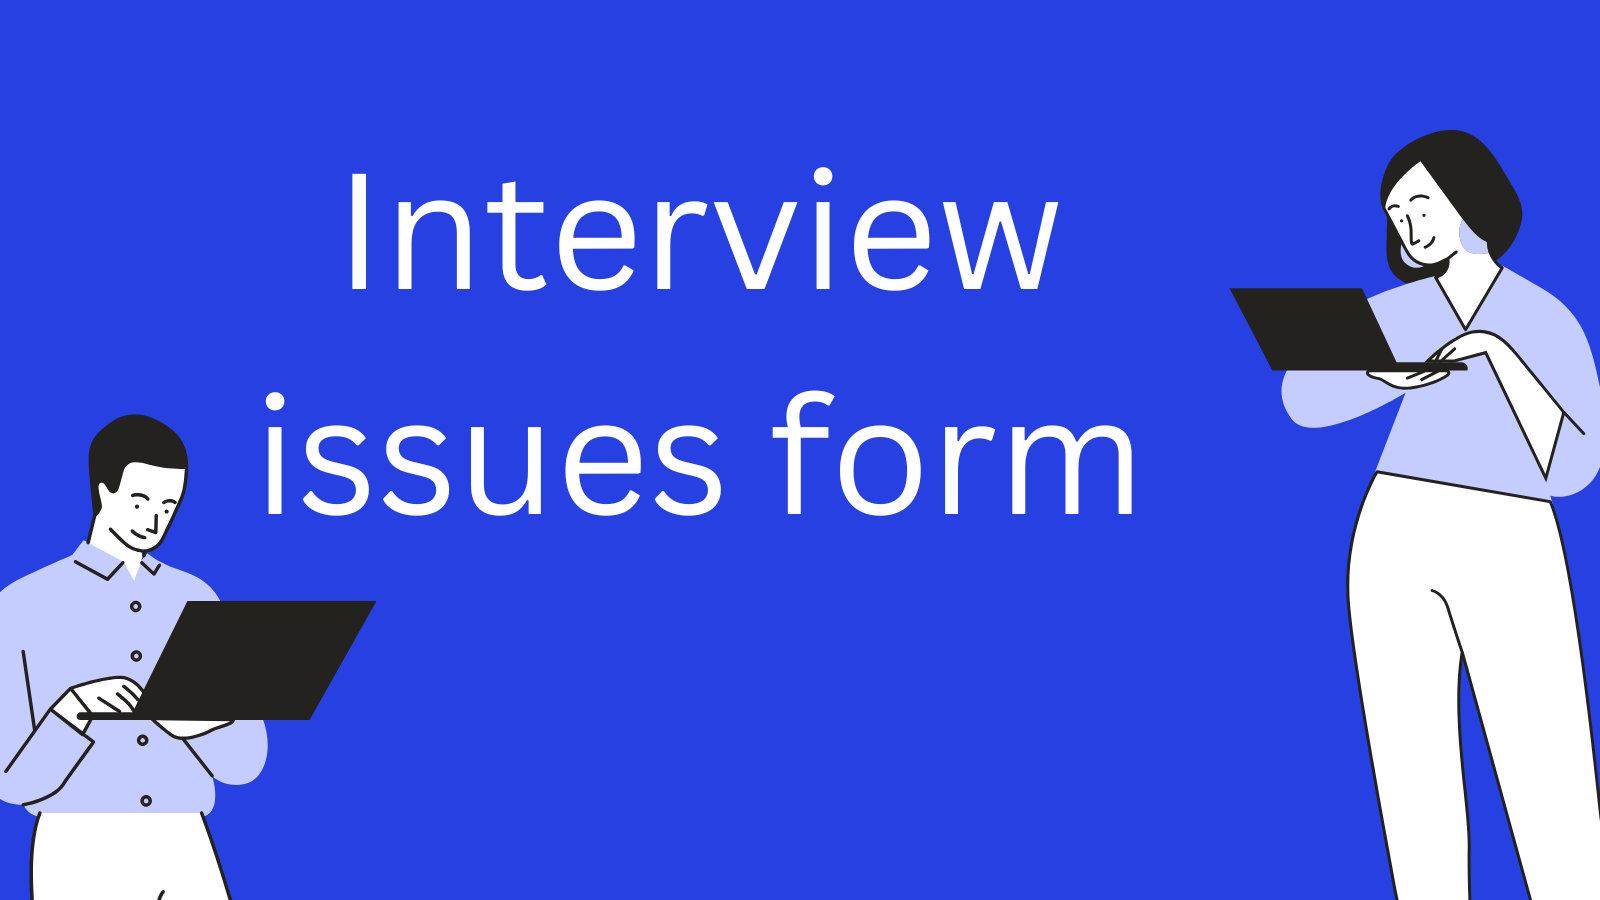 Interview issues form